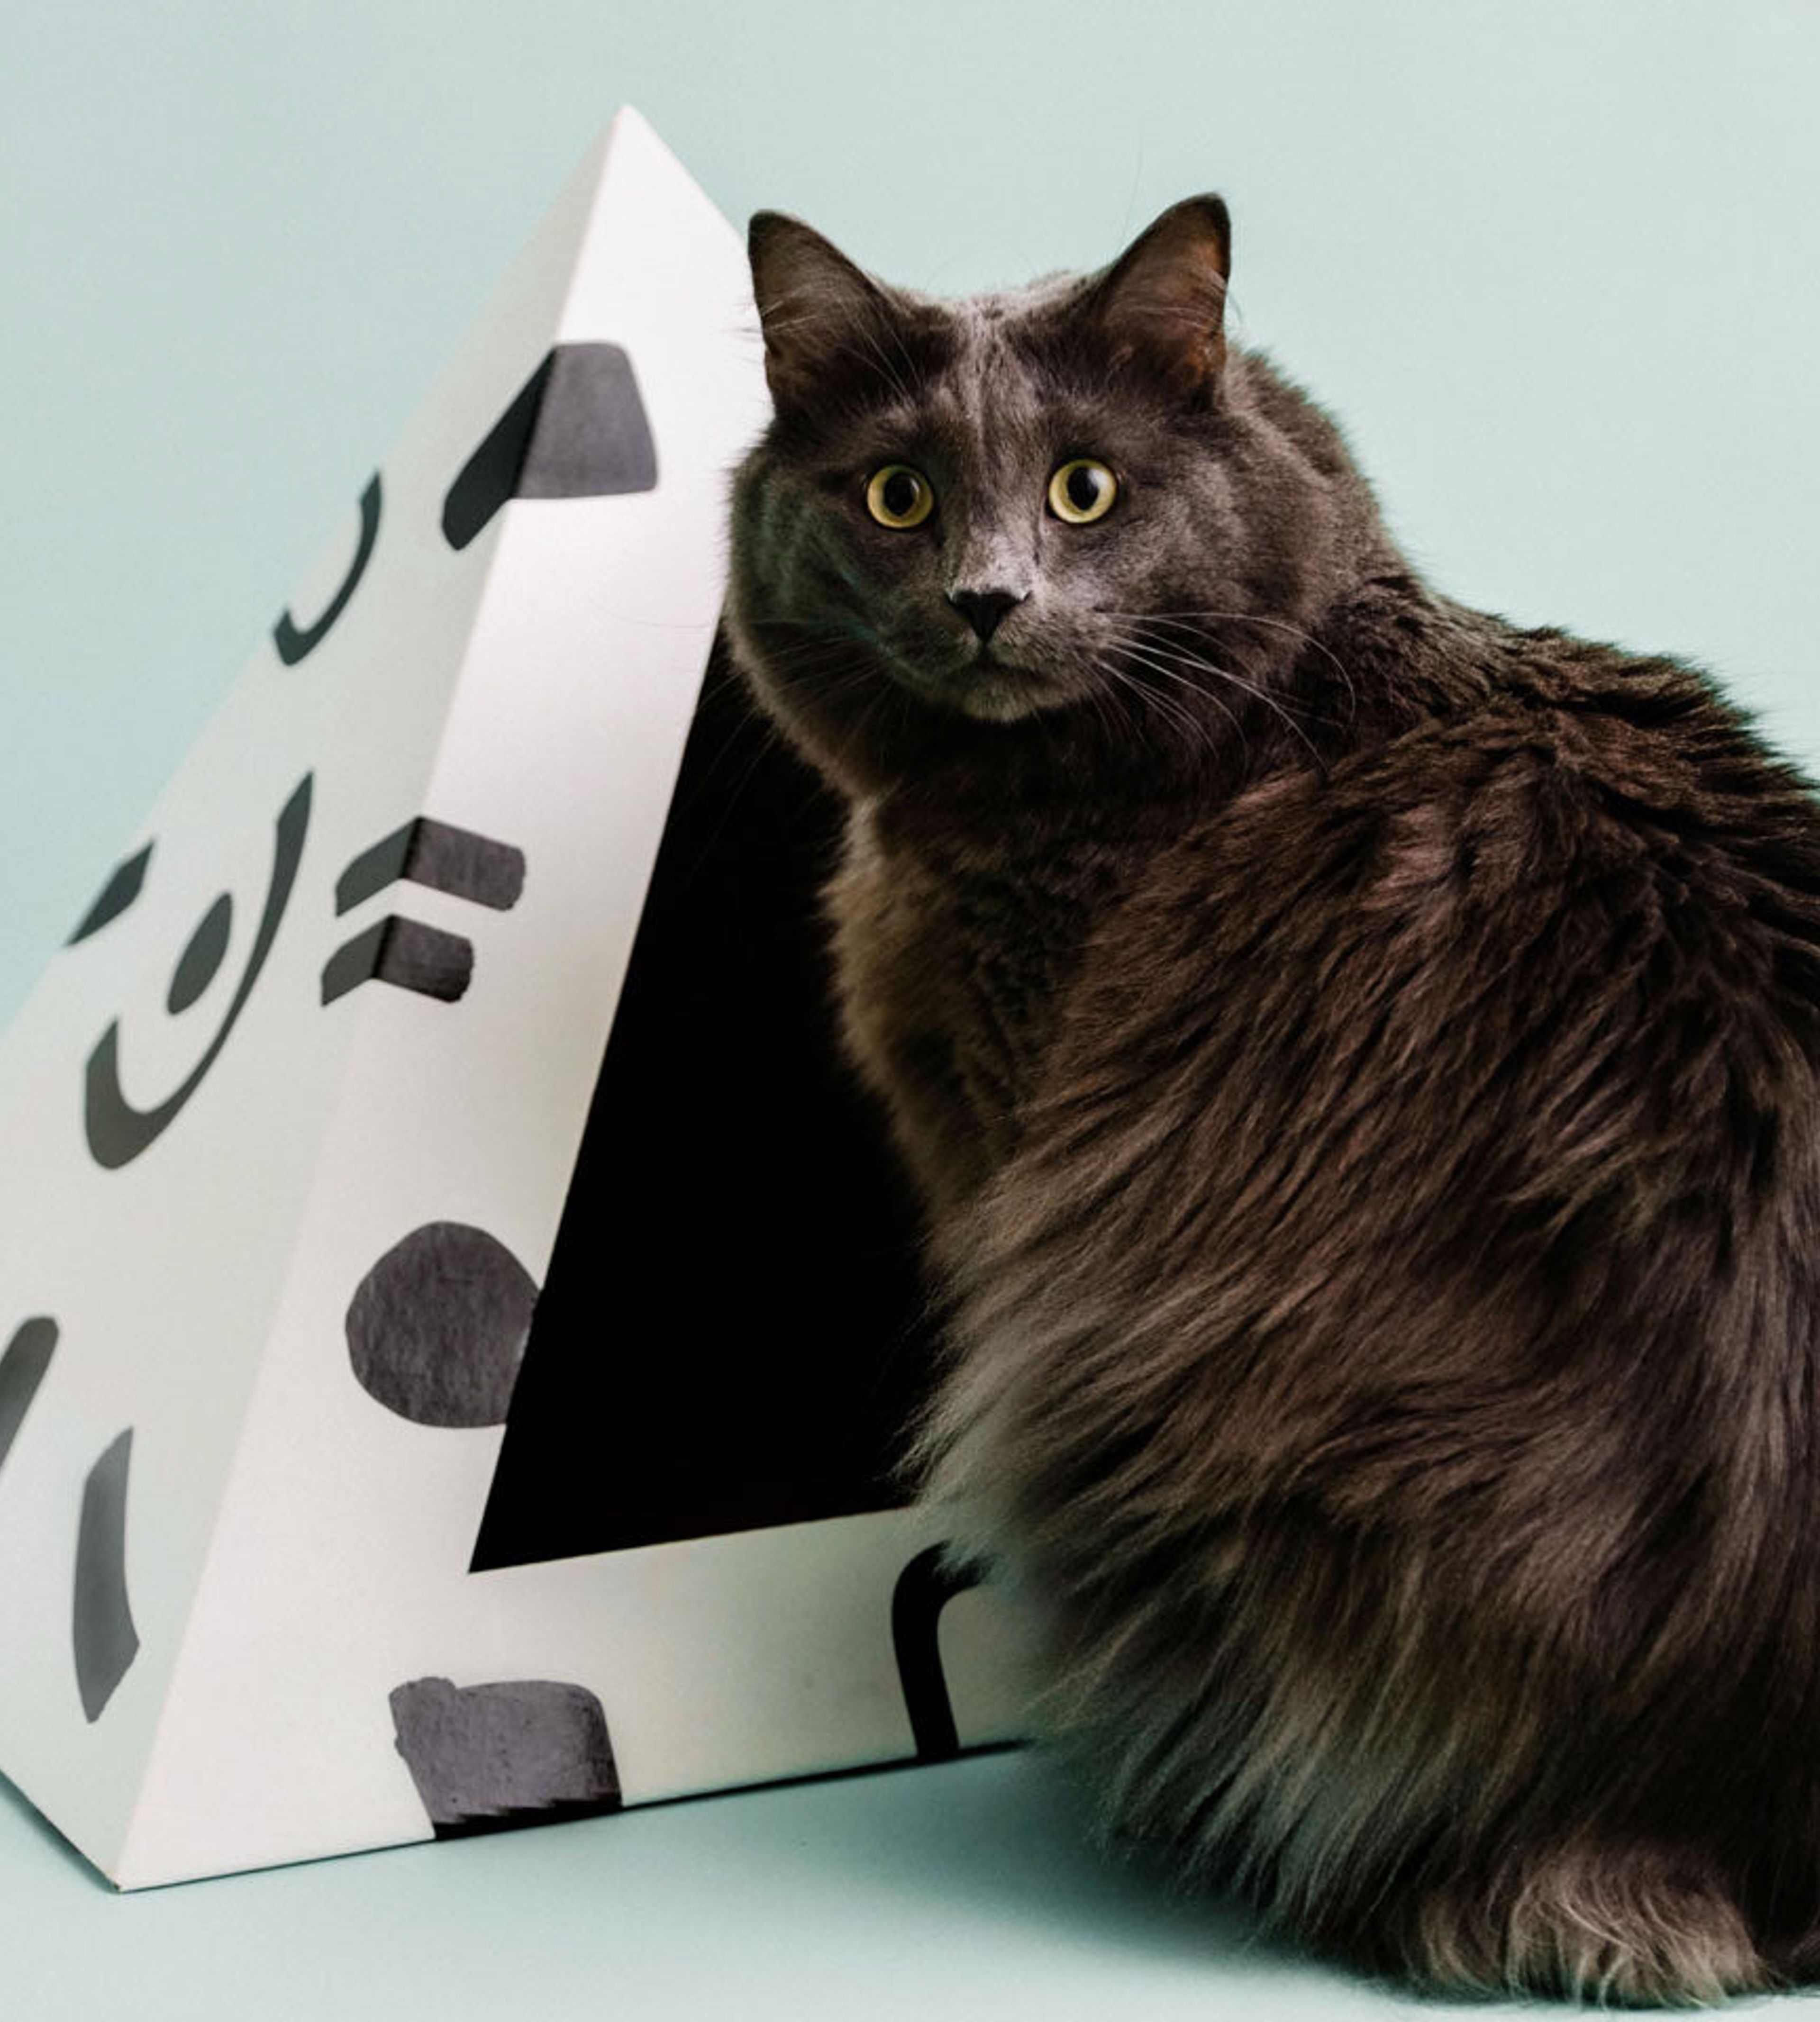 Design-Minded Cat Furniture & Toys to Treat Your Cat to